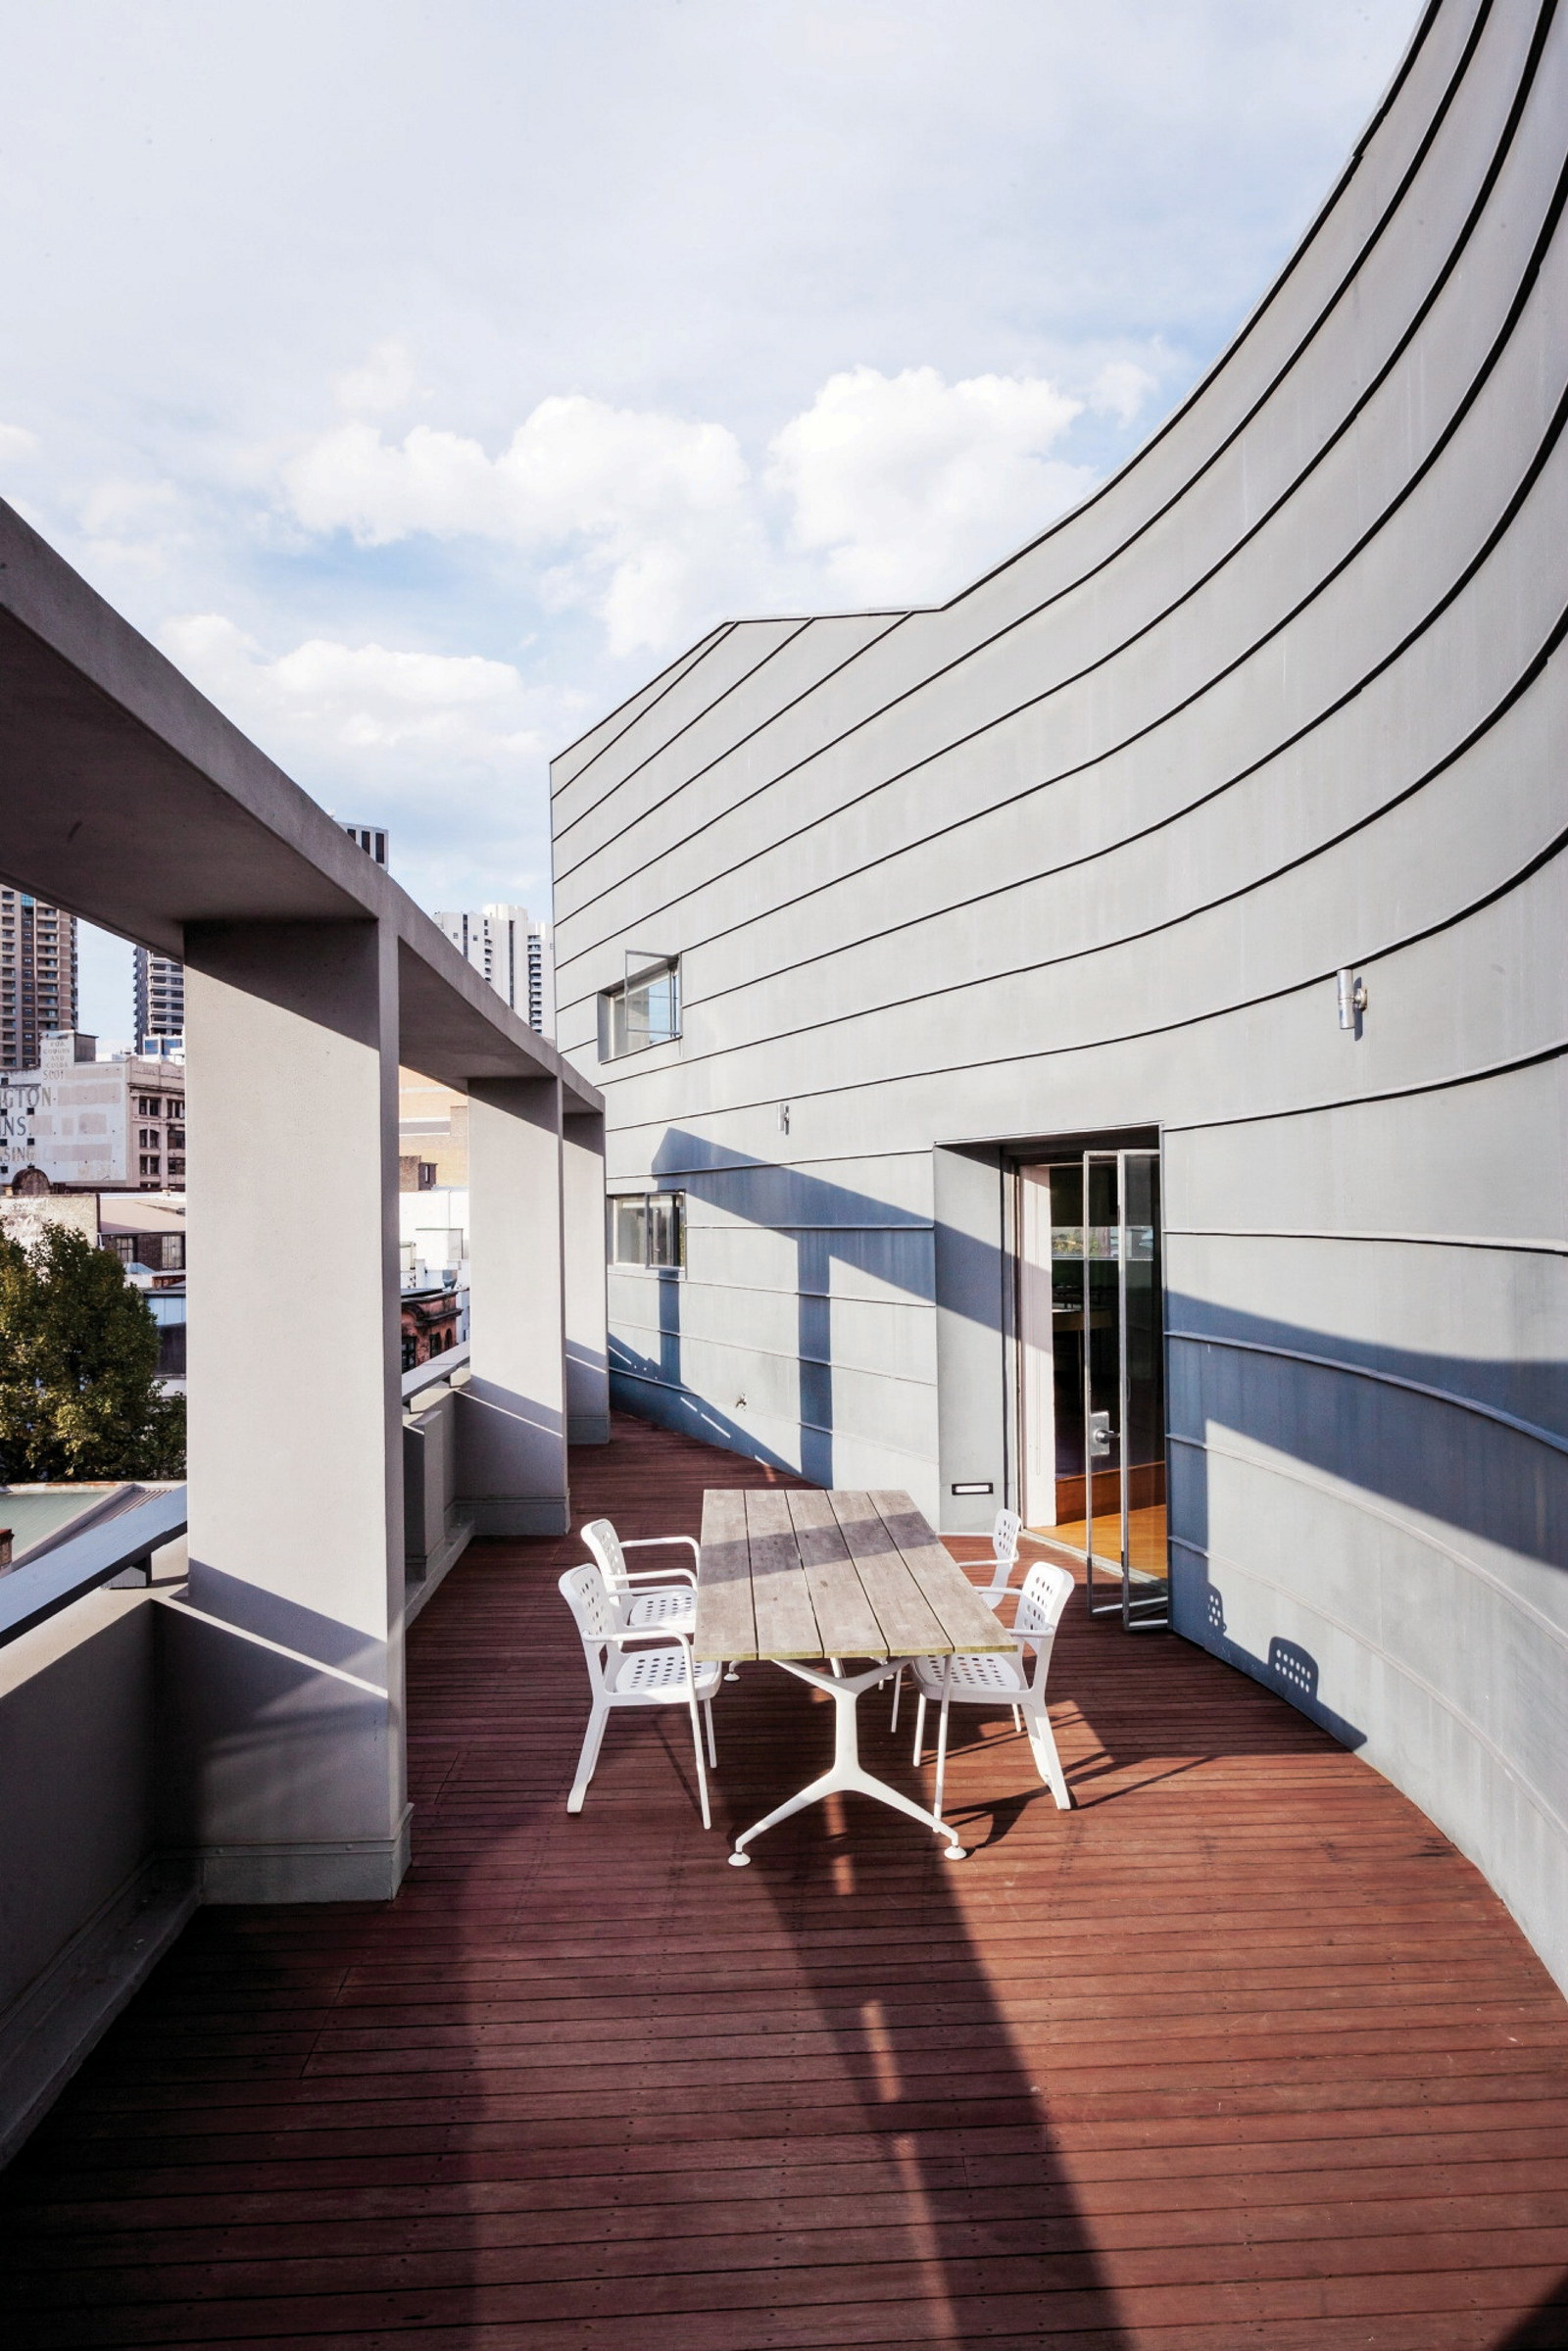 The outdoor terrace with wooden floorboards, table setting and exterior zinc cladding. The brise soleil (French for sun breaker) casts a shadow across the terrace